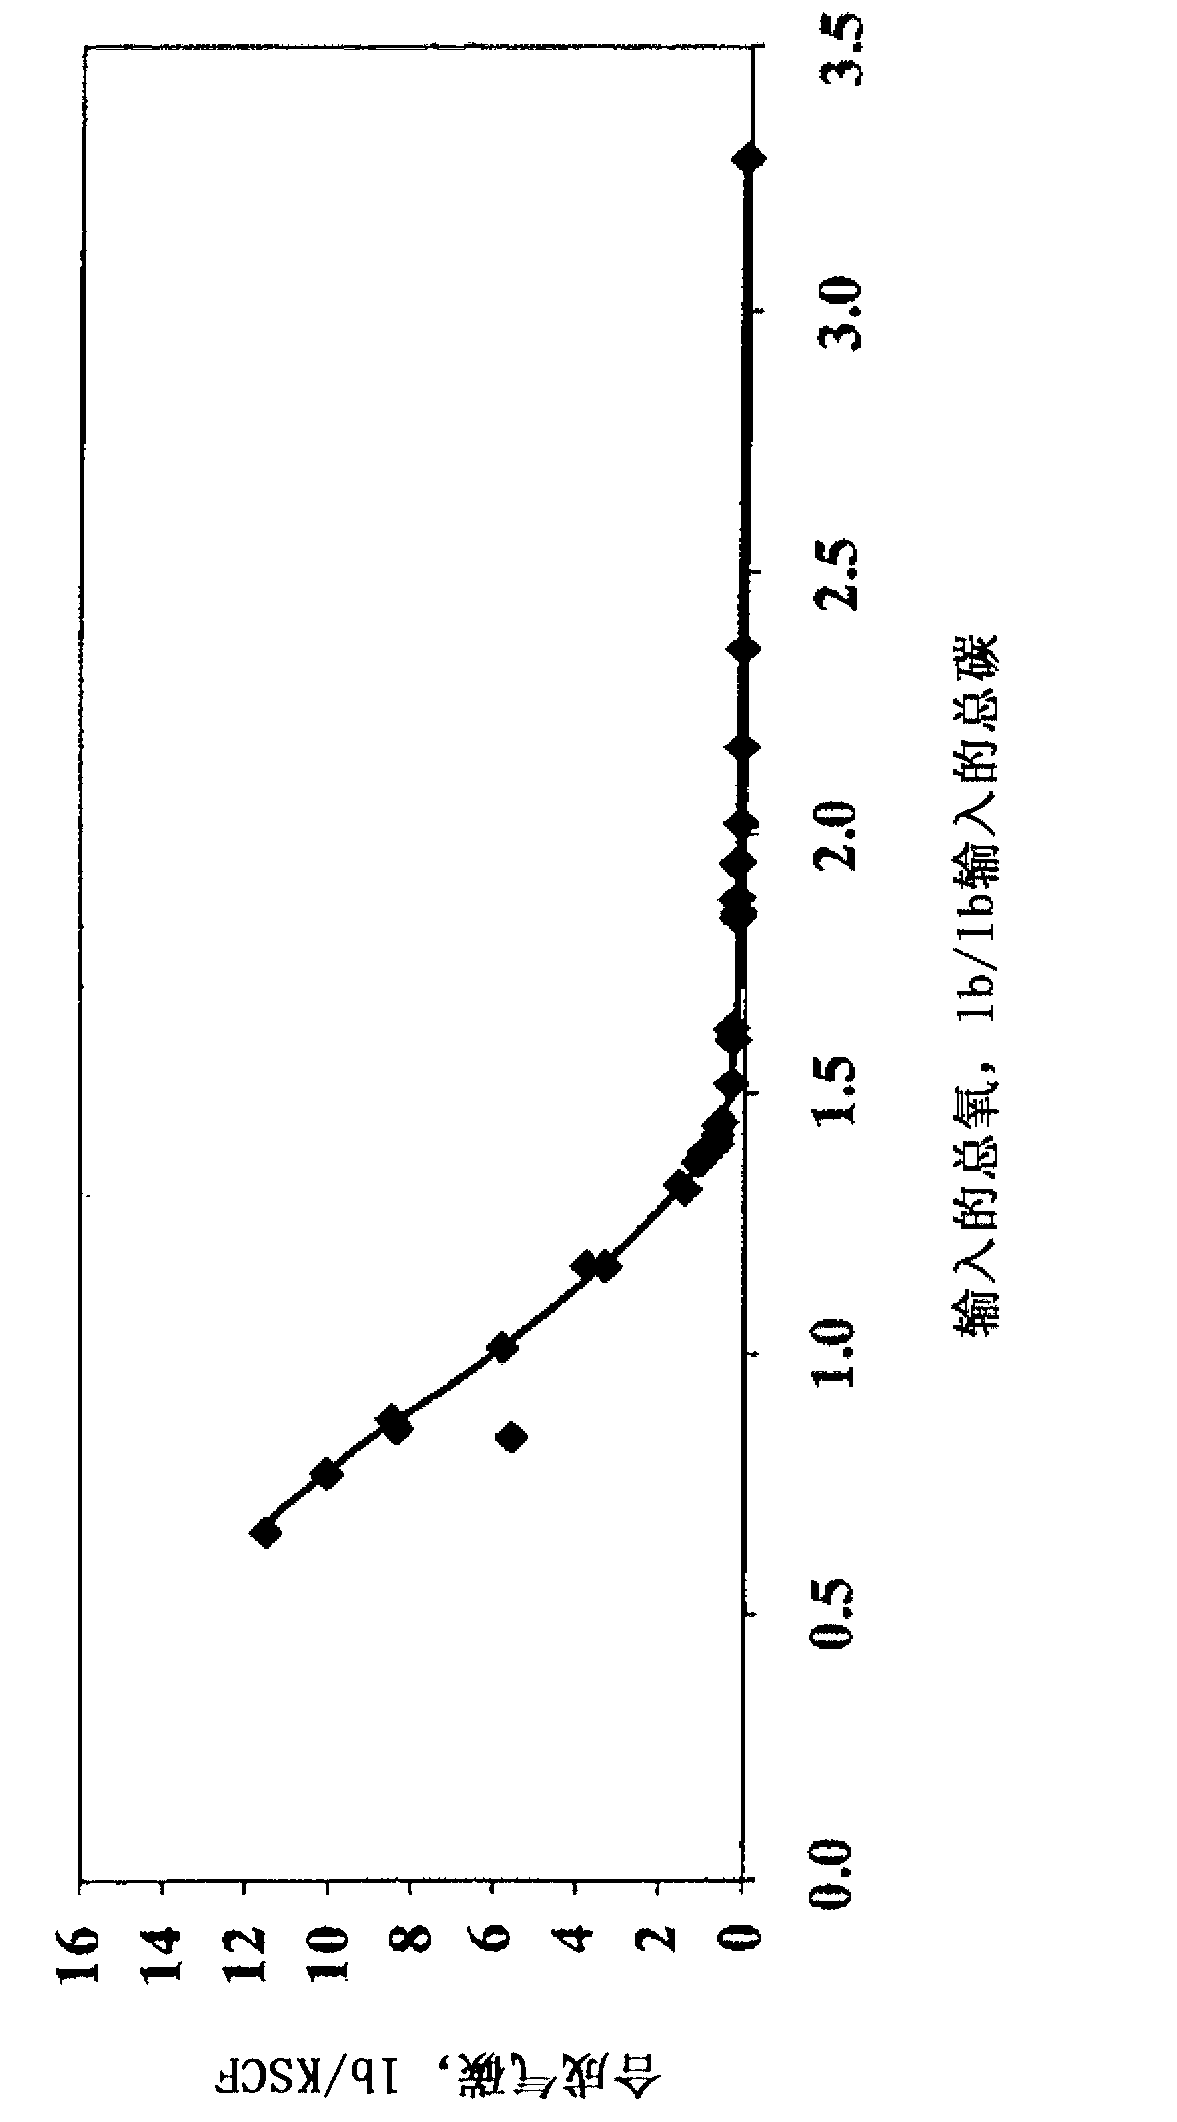 Methods for gasification of carbonaceous materials